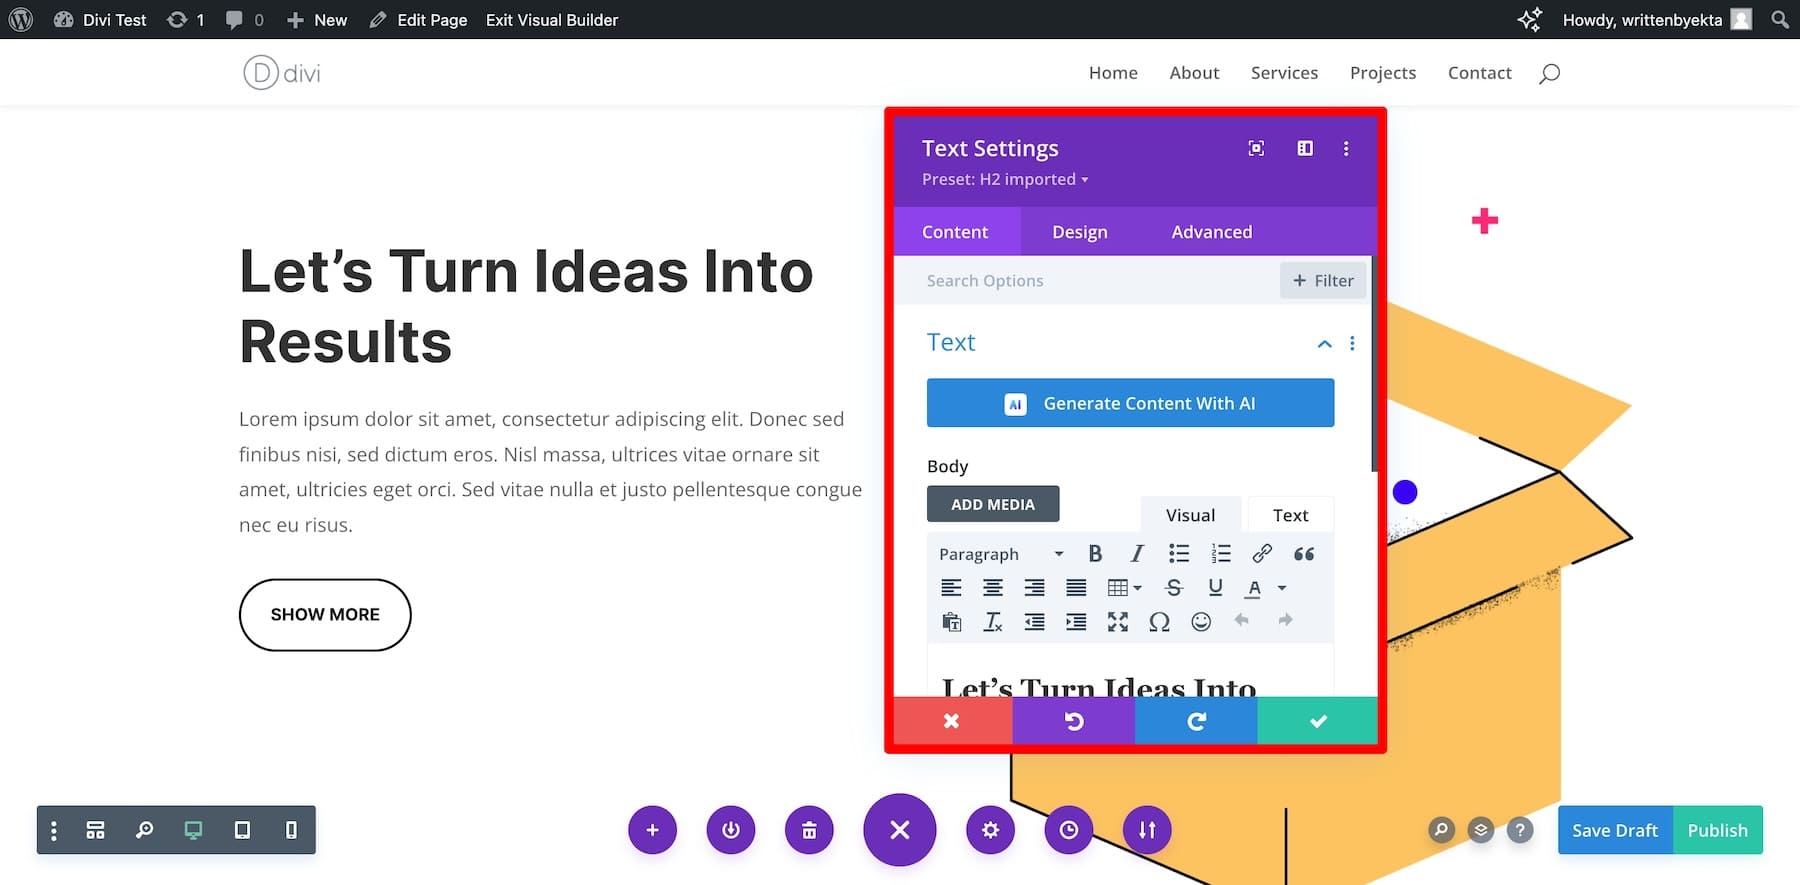 divi page builder lets you customize every part of your design